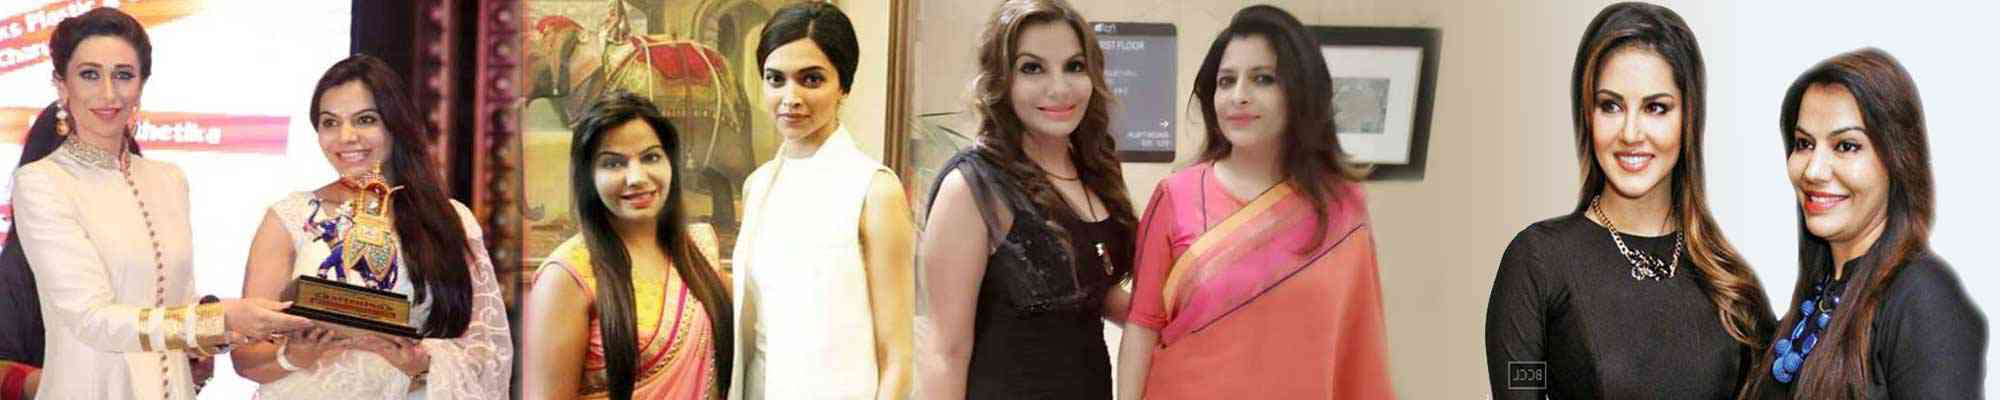 Best Plastic surgeon for Bollywood stars